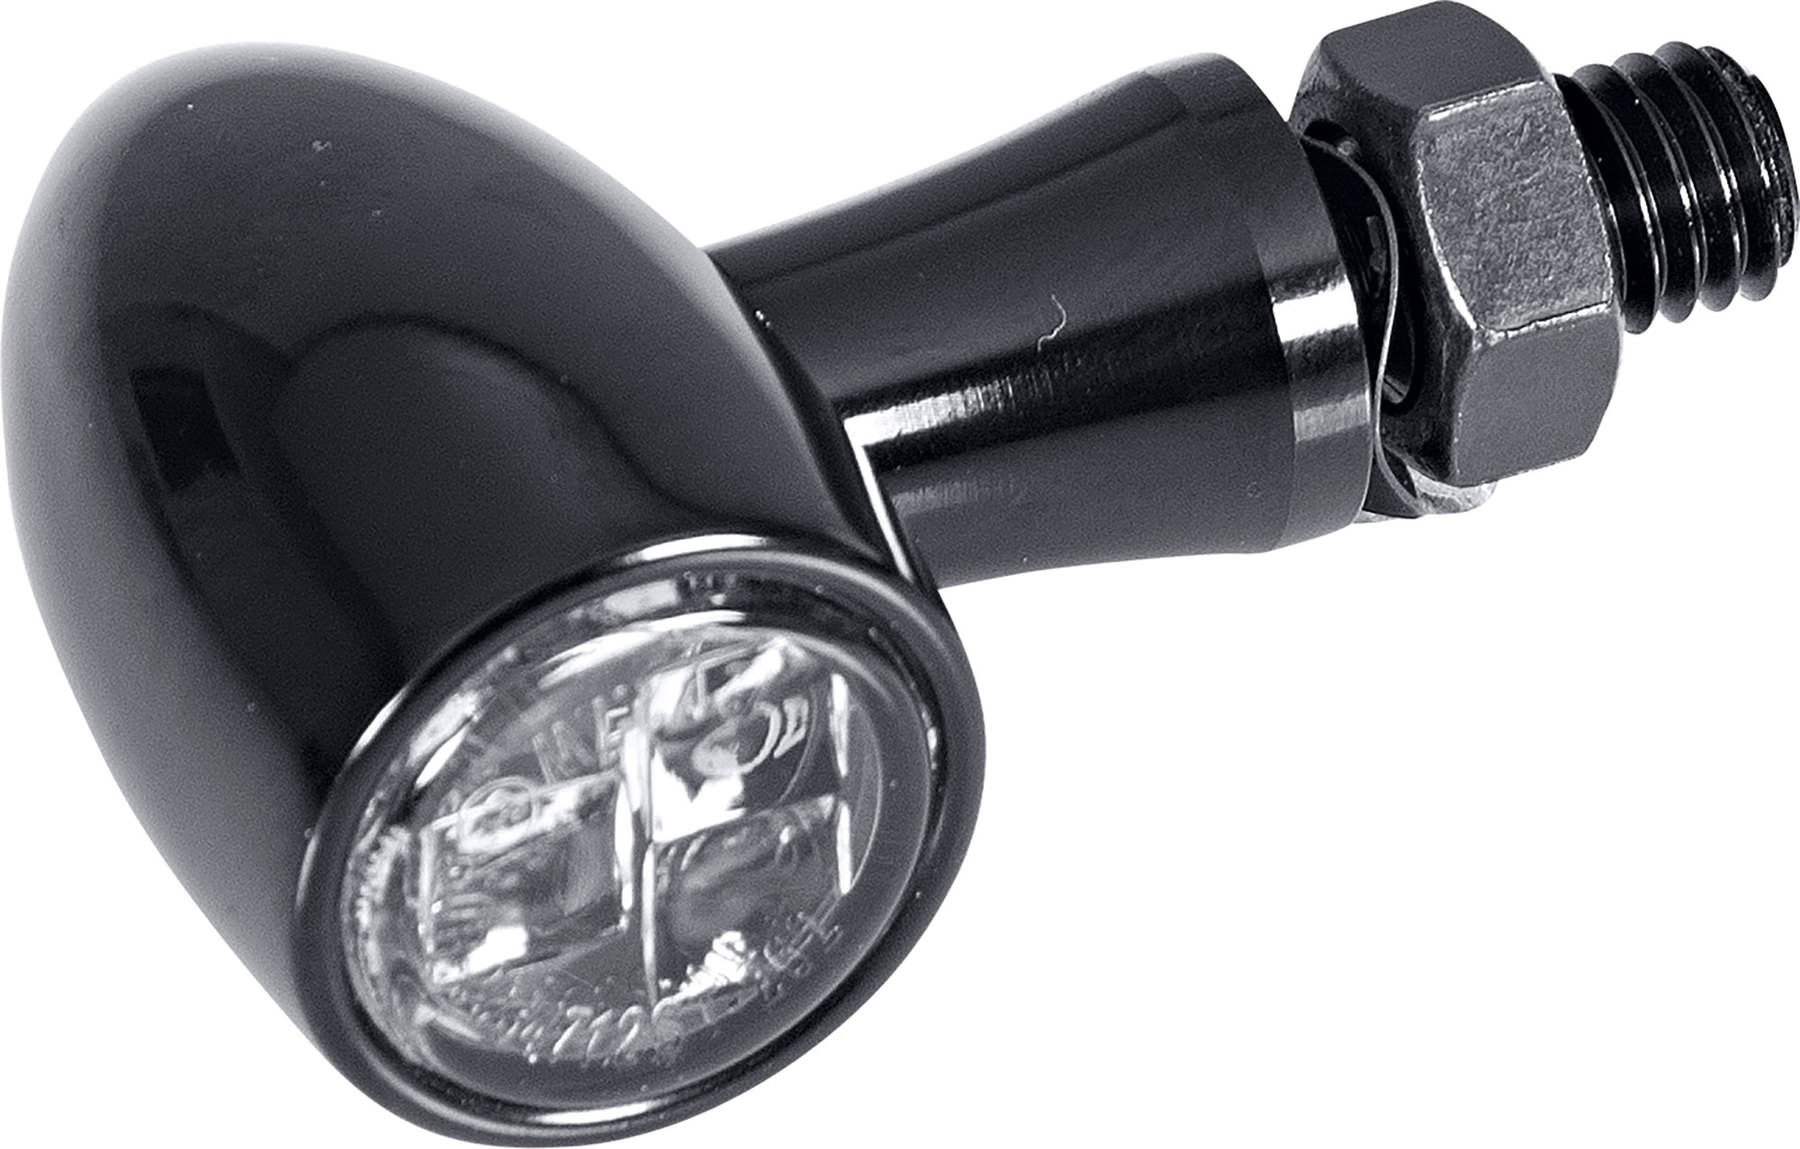 Buy Power LED Turn Signals Black | Louis motorcycle clothing and technology